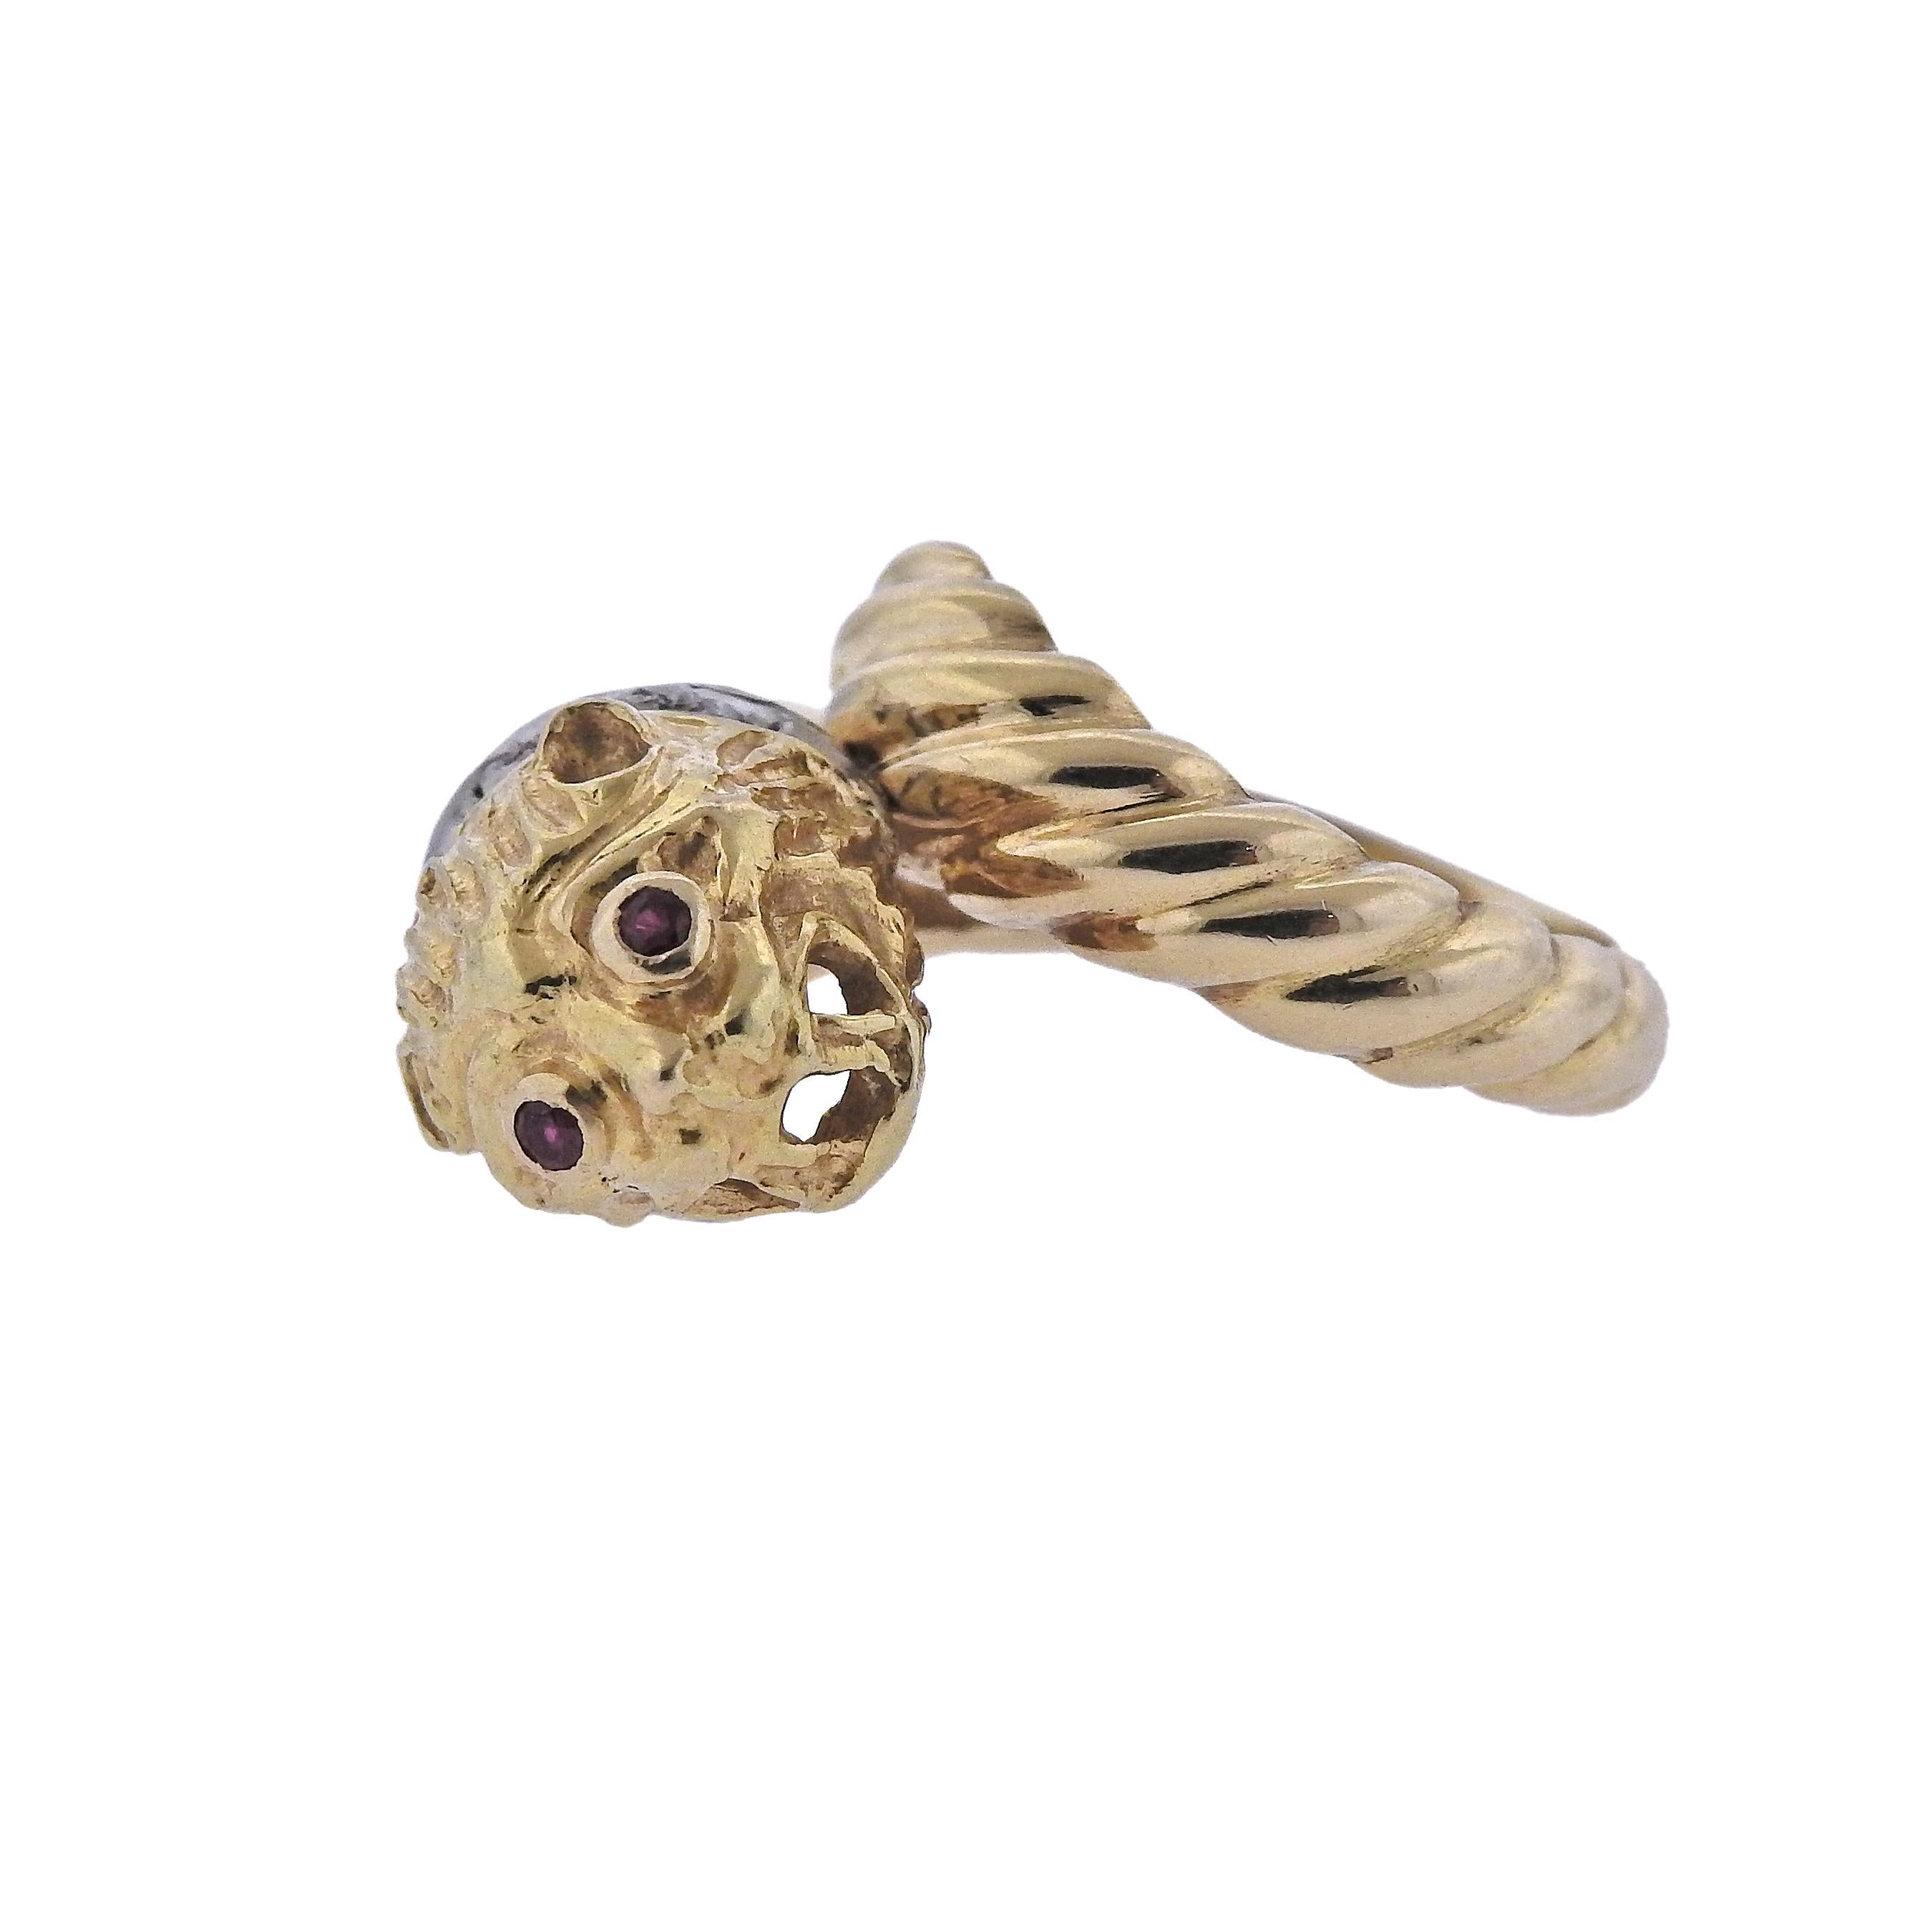 18k yellow gold Chimera ring, crafted by Ilias Lalaounis, set with approx. 0.05ctw diamonds and ruby eyes.  Ring size - 5, ring top is 15mm wide, sits approx. 12mm from the top of the finger, weighs 9.7 grams. Marked: A21 750, Greece, Maker's mark.